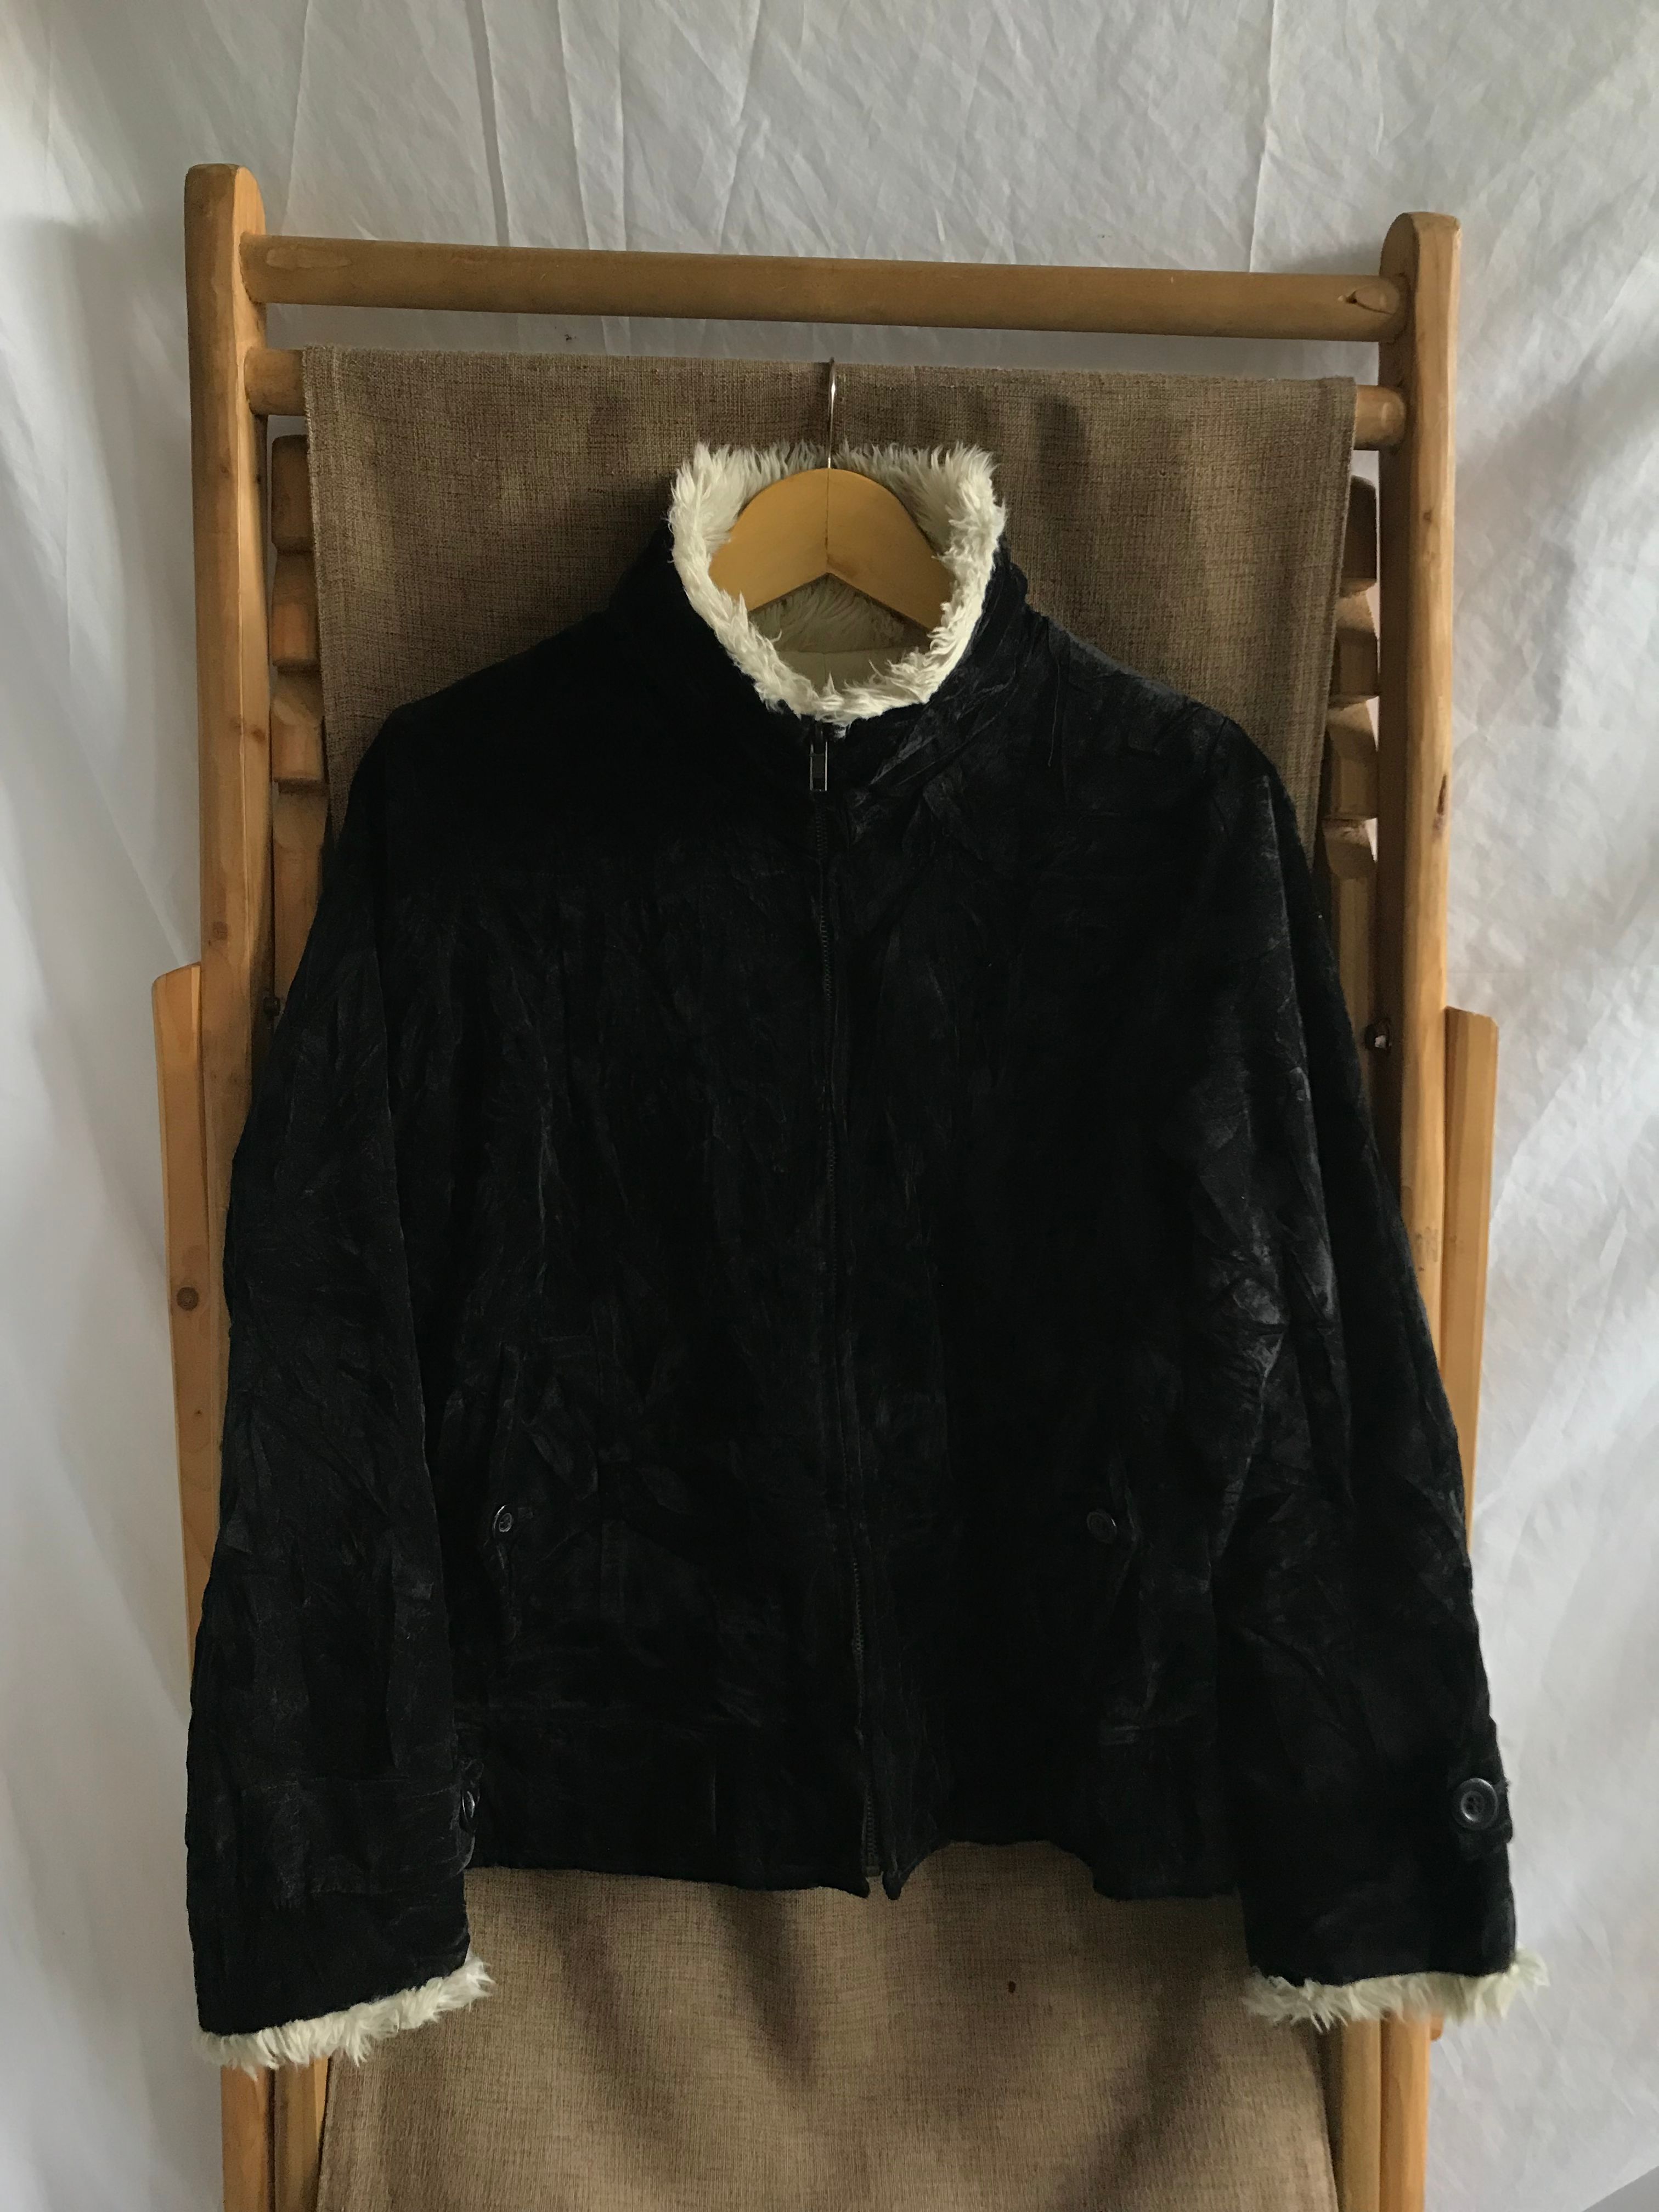 Pre-owned 14th Addiction X Hysteric Glamour Need Gone Fur Velvet Jacket By Majestic Legon In Black